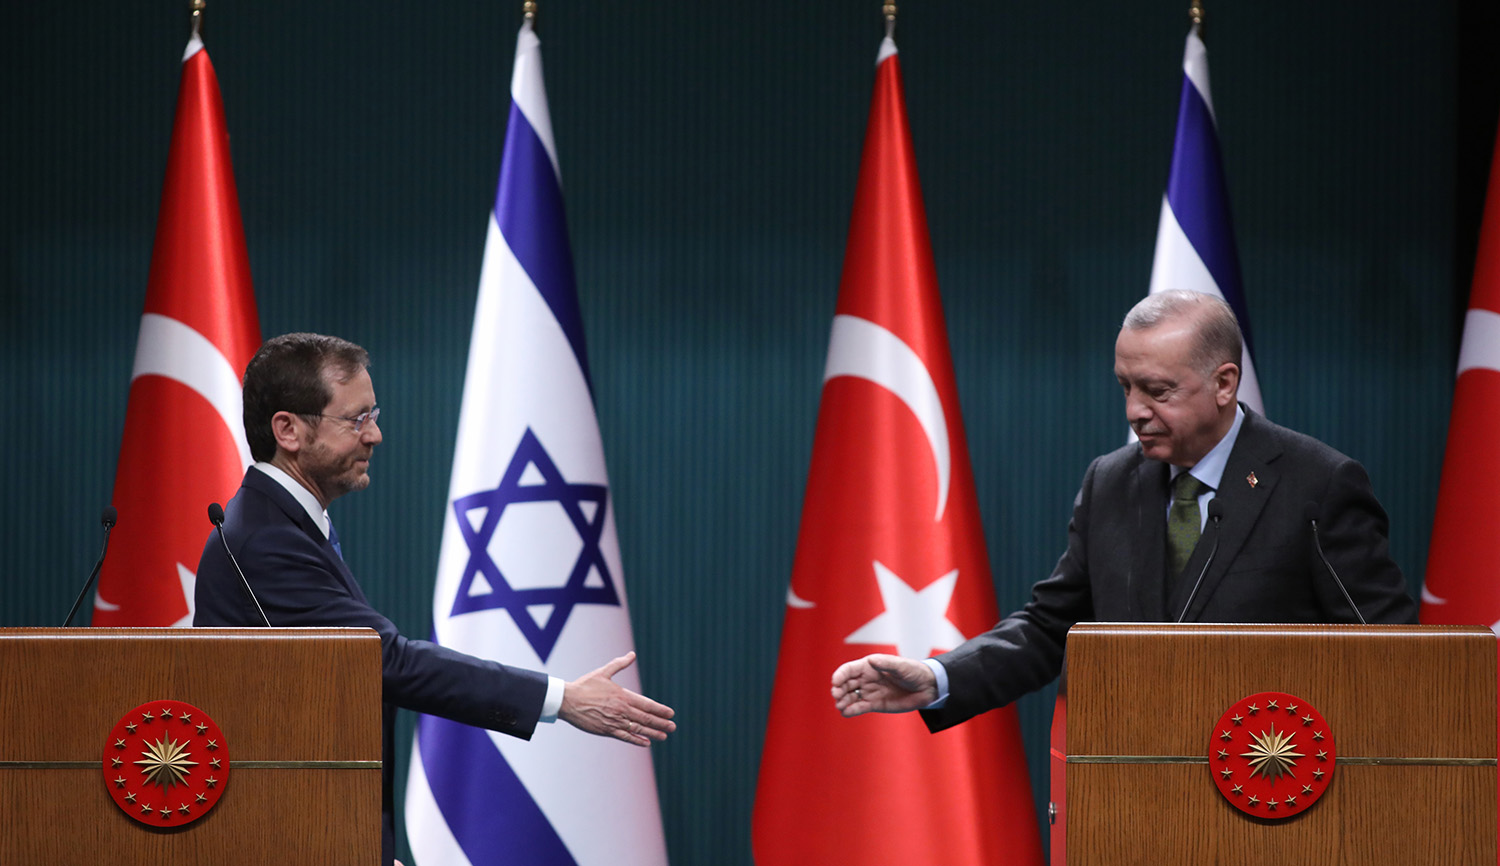 
Israeli president Isaac Herzog and Turkish President Recep Tayyip Erdoğan at a press conference in Ankara on March 9, 2022. Yavuz Ozden/dia images via Getty Images.





